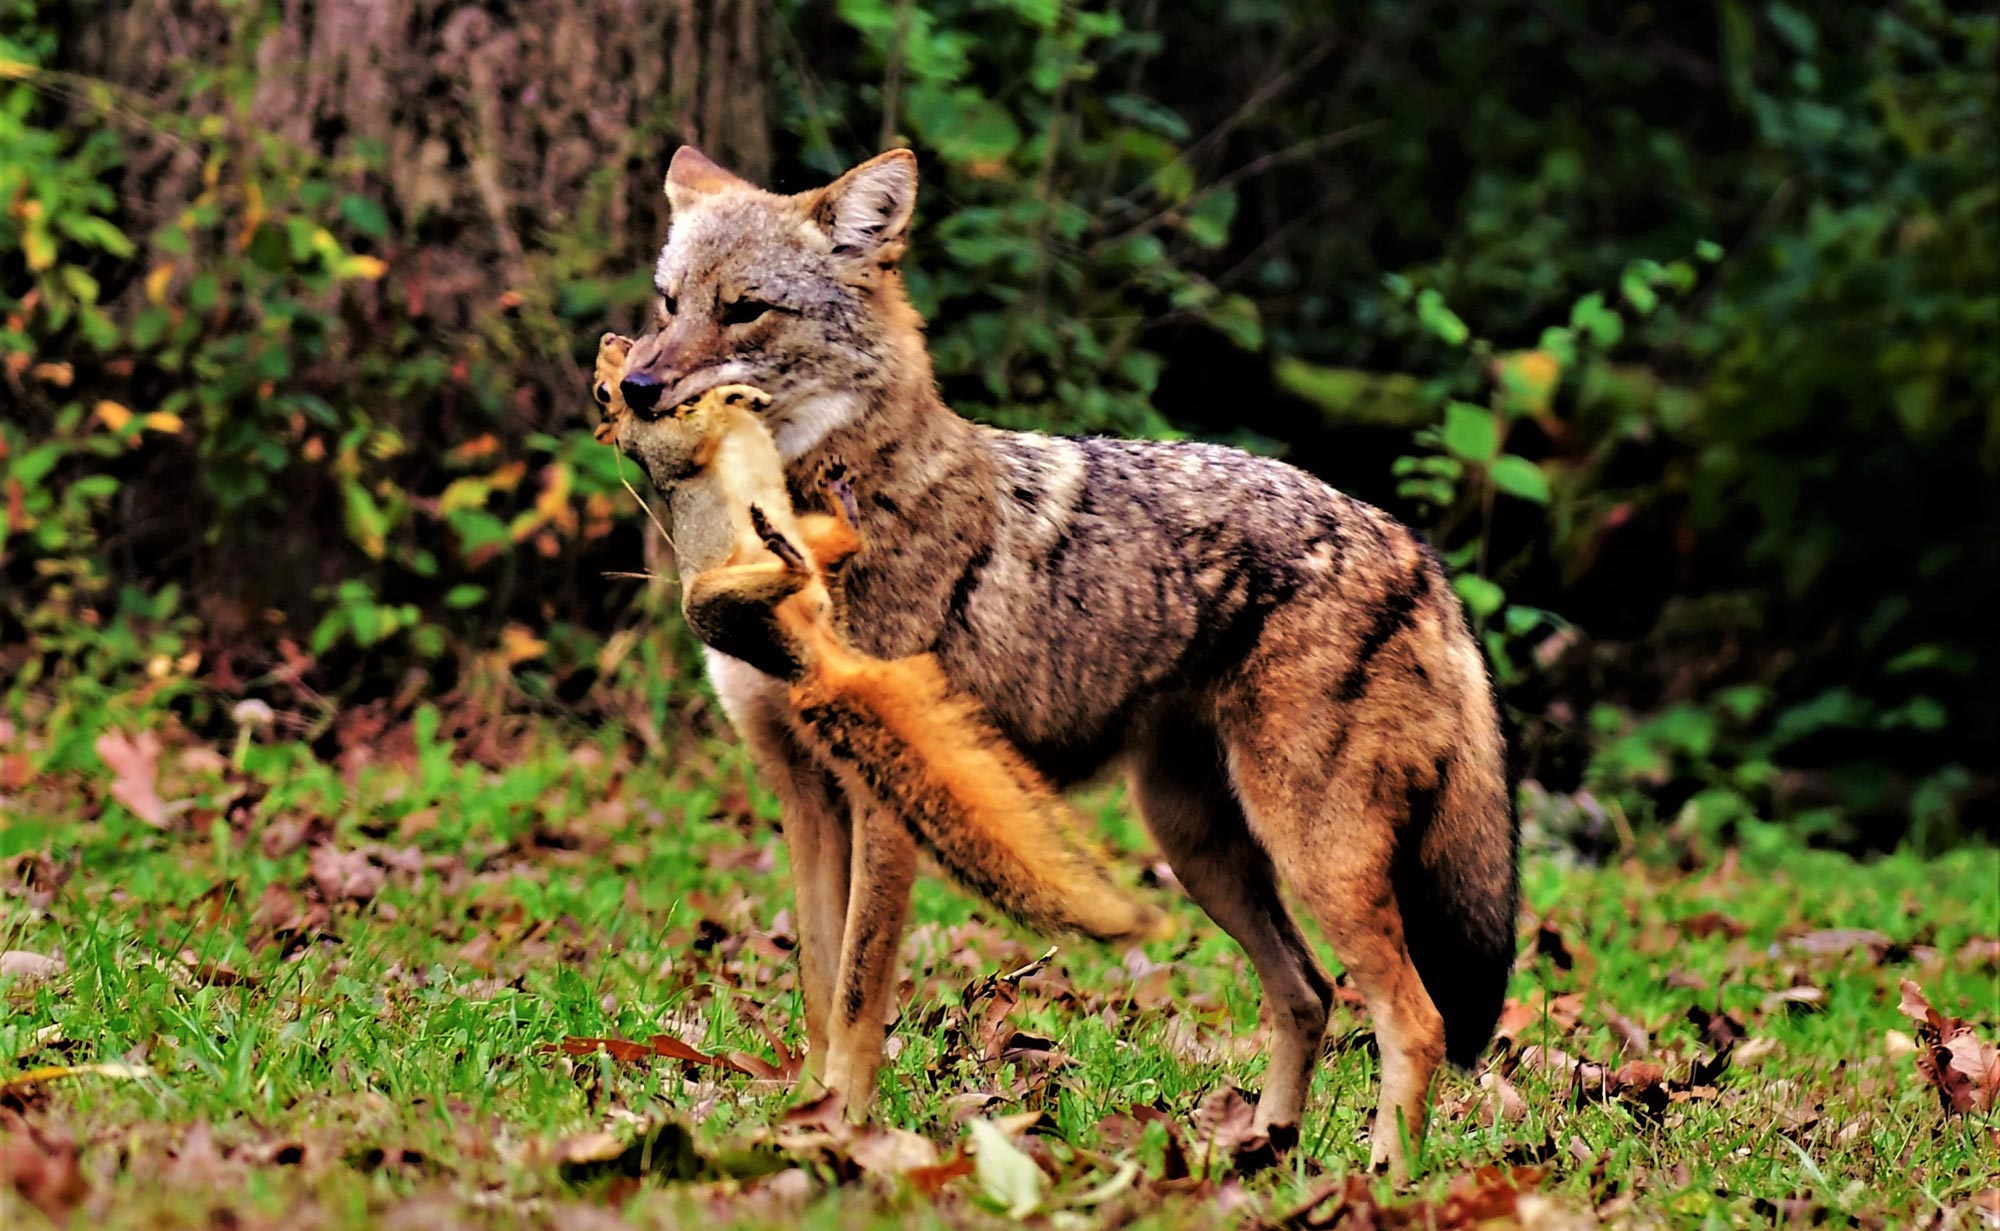 A coyote with a squirrel in its mouth.